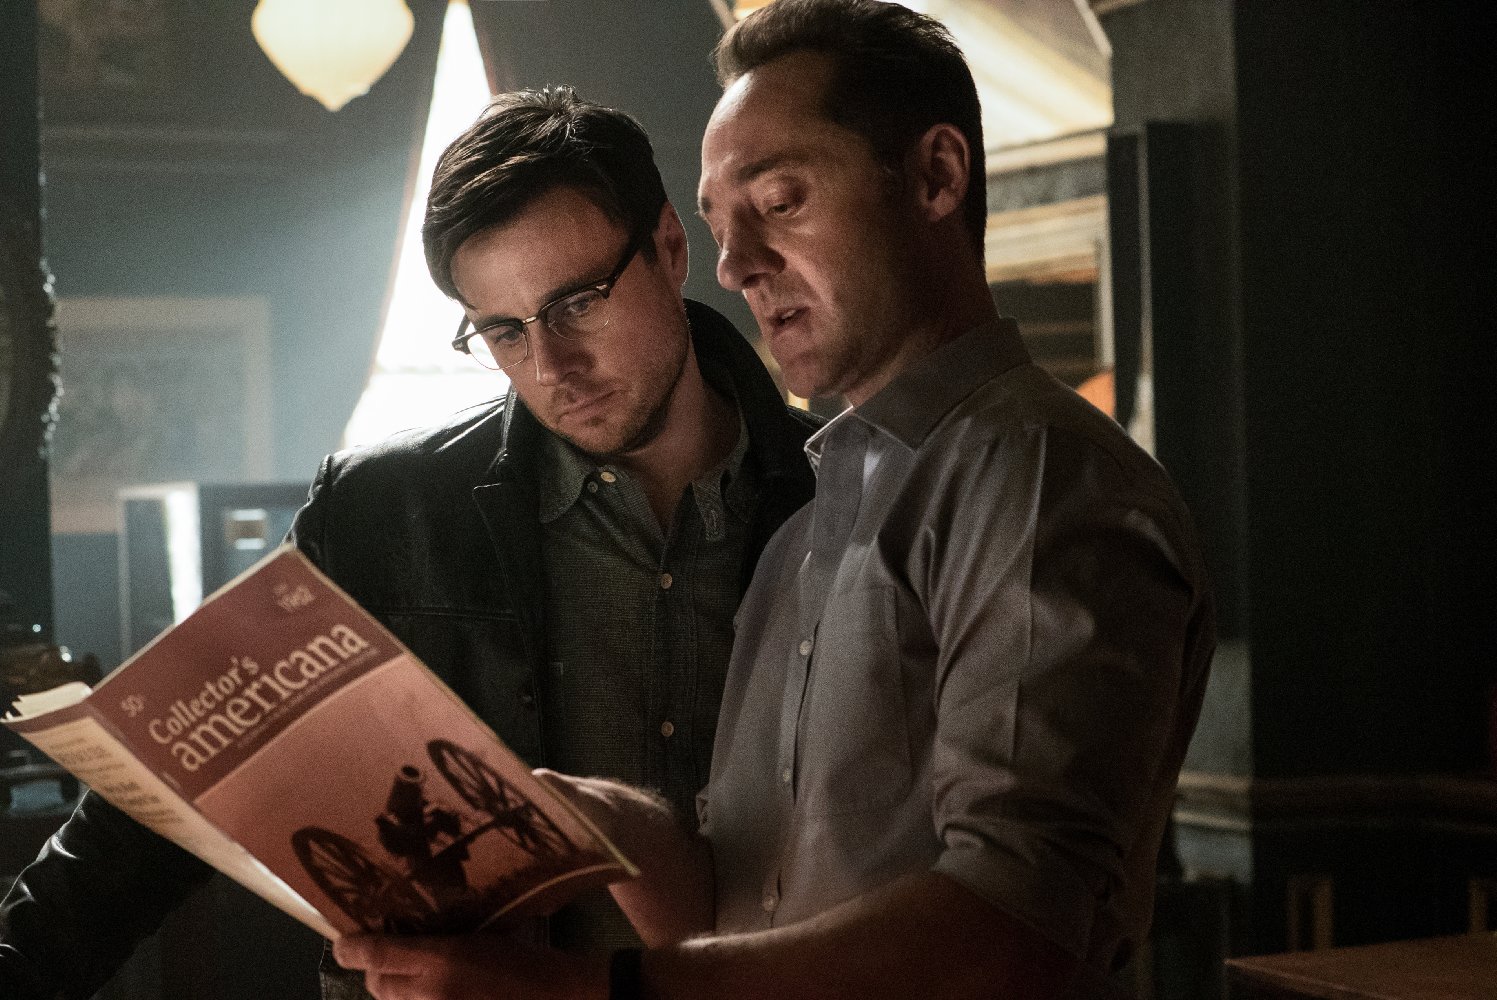 The Man In The High Castle Cast And Producer On The Allure Of ‘What If’